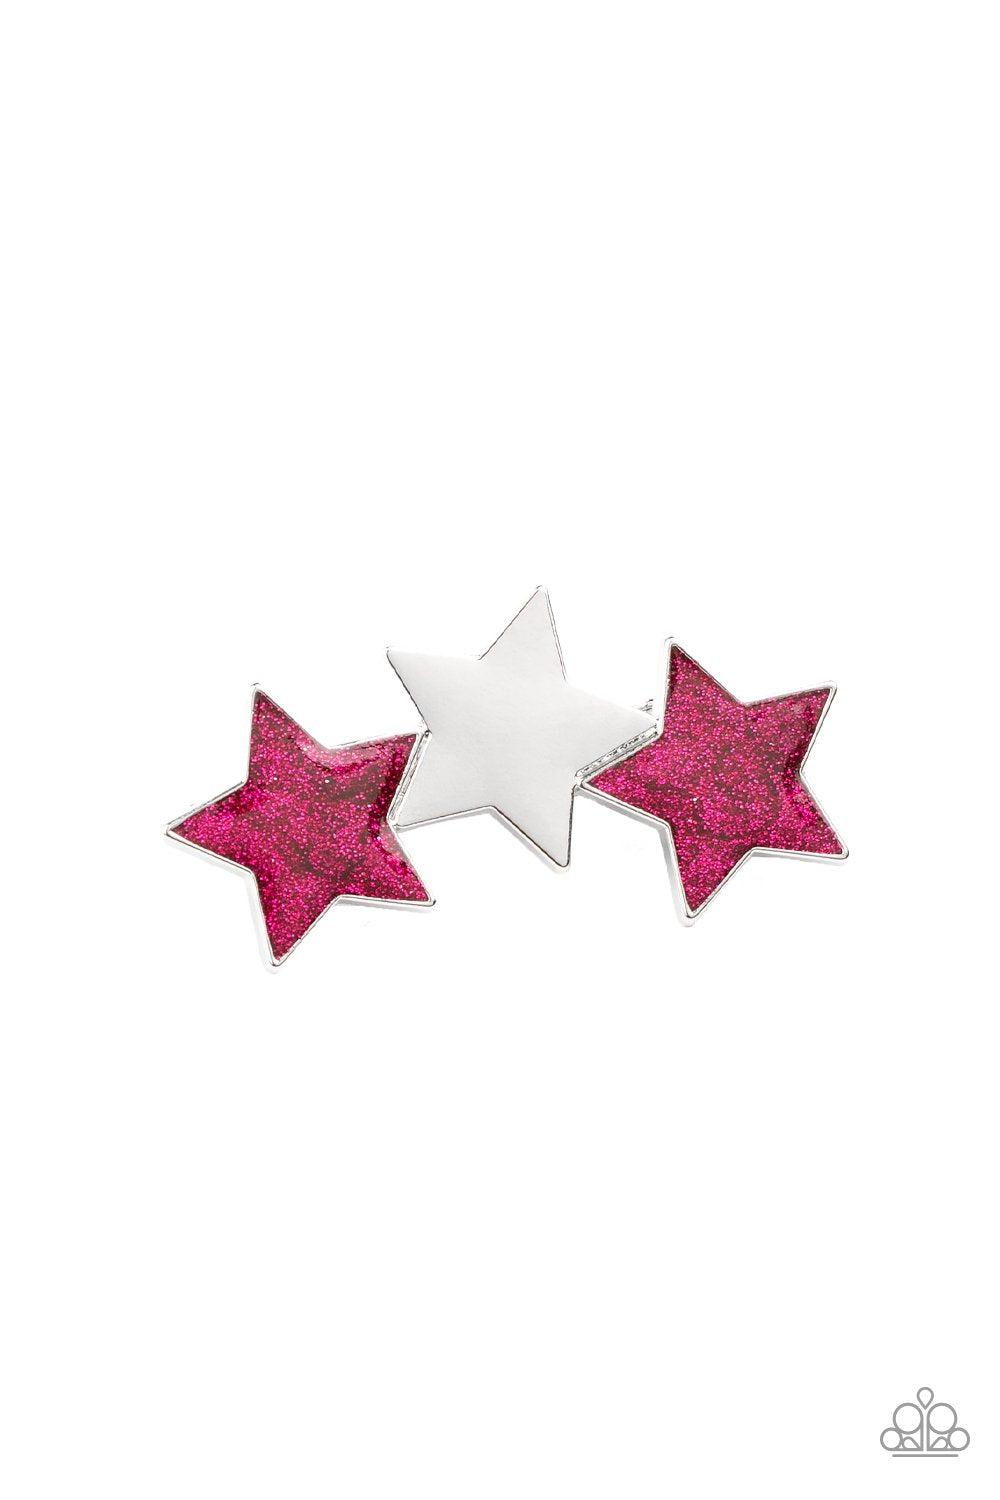 Don't Get Me STAR-ted! Pink Glitter Hair Clip - Paparazzi Accessories-CarasShop.com - $5 Jewelry by Cara Jewels